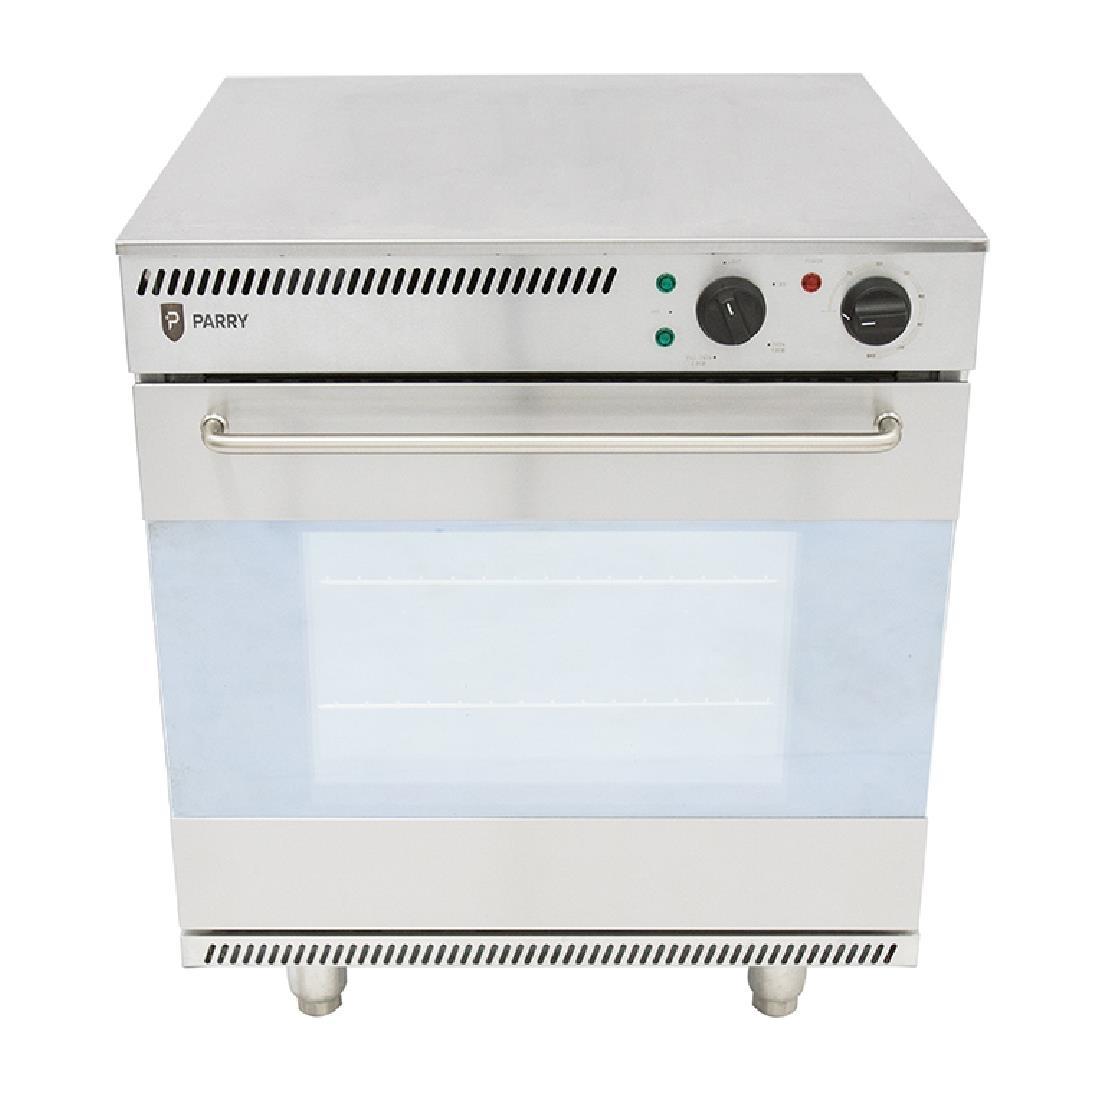 Parry Electric Oven NPEO - CD458  - 1